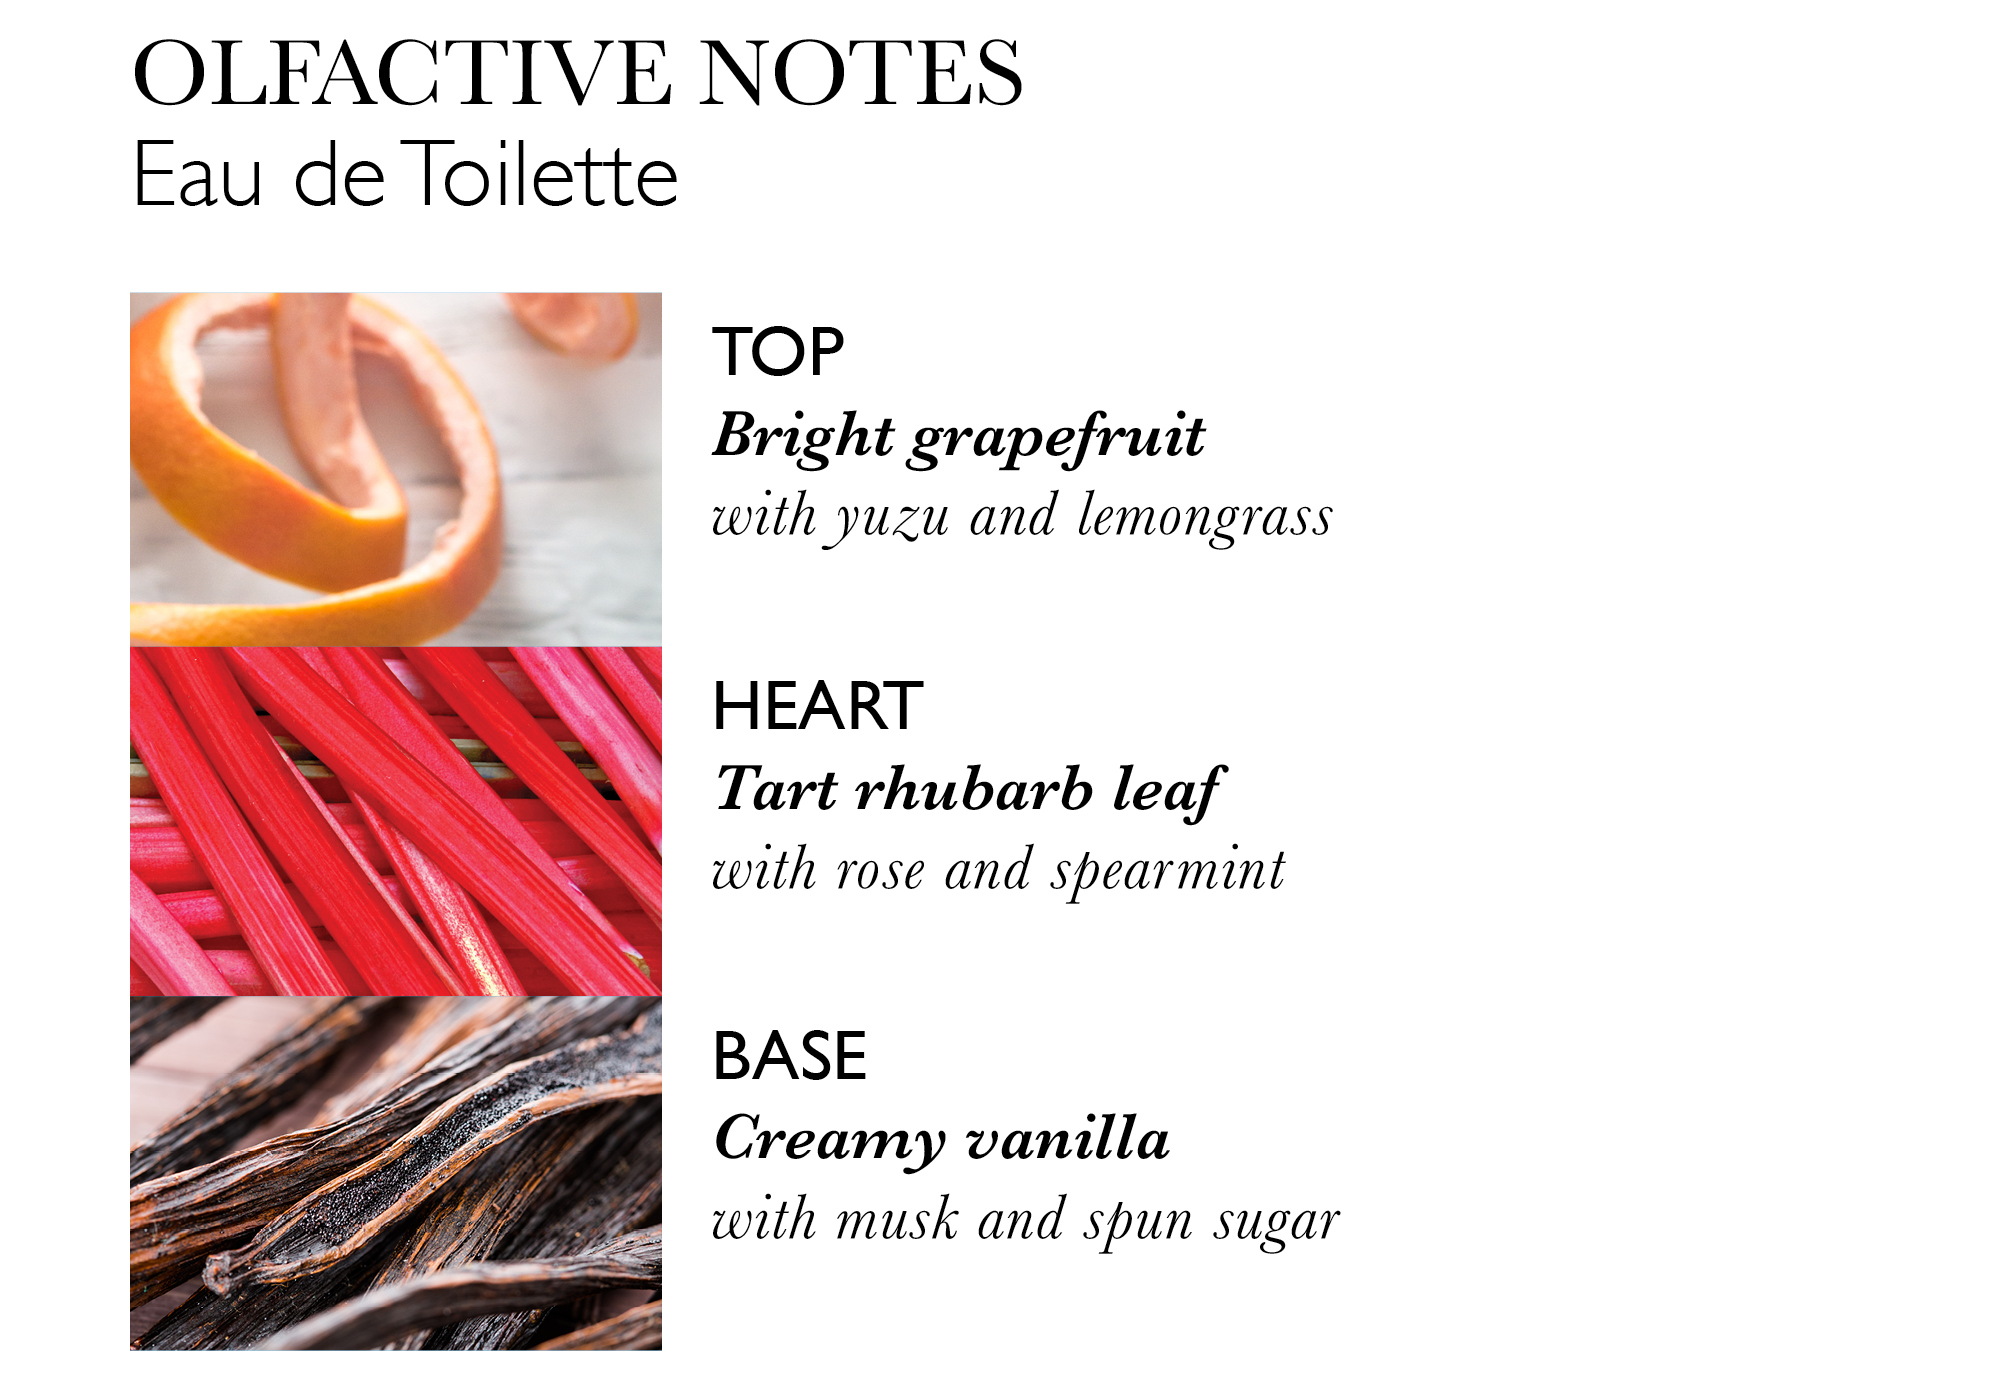 Olfactive Notes Eau de Toilette, Top bright grapefruit with yuzu and lemongrass, Heart tart rhubarb leaf with rose and spearmint, Base creamy vanilla with musk and spun sugar.